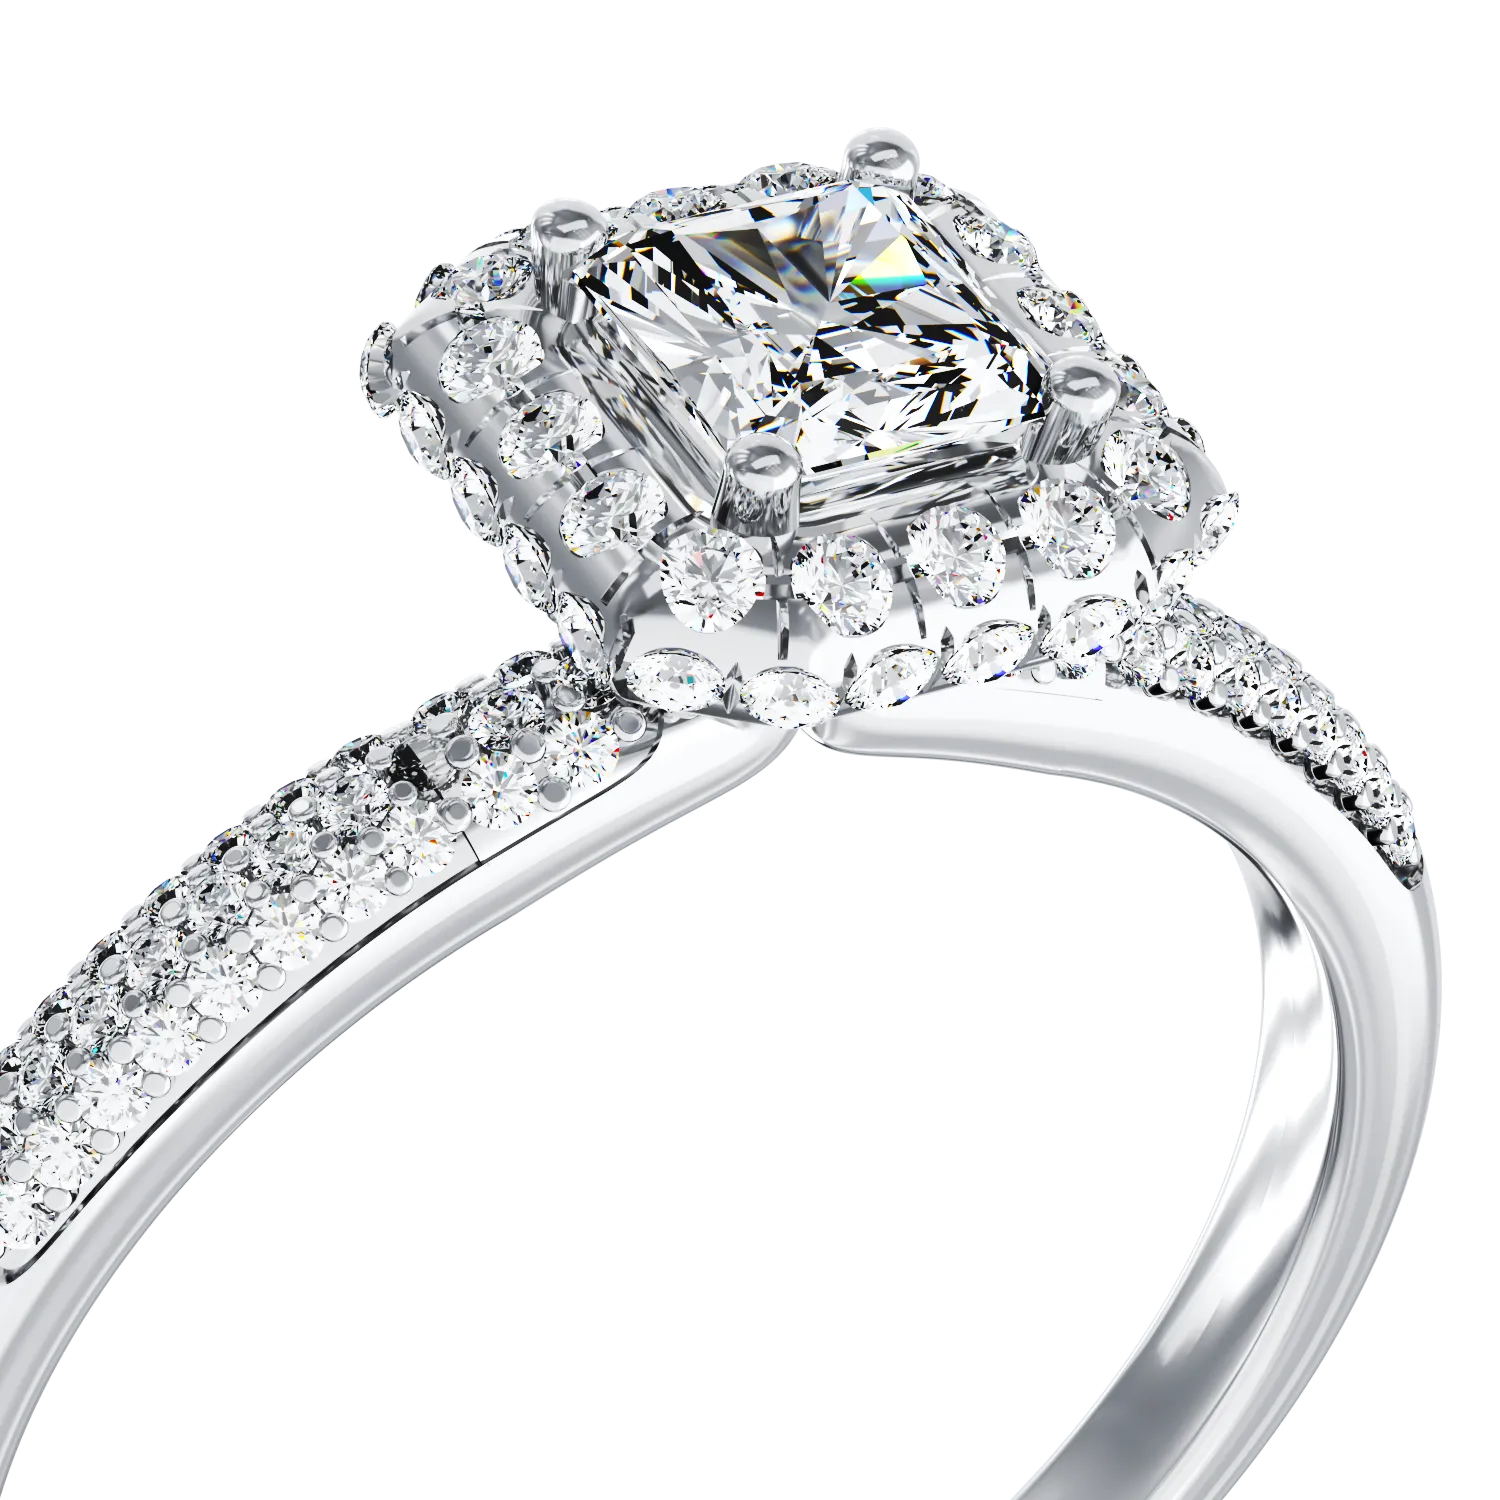 18K white gold engagement ring with 0.2ct diamond and 0.42ct diamonds